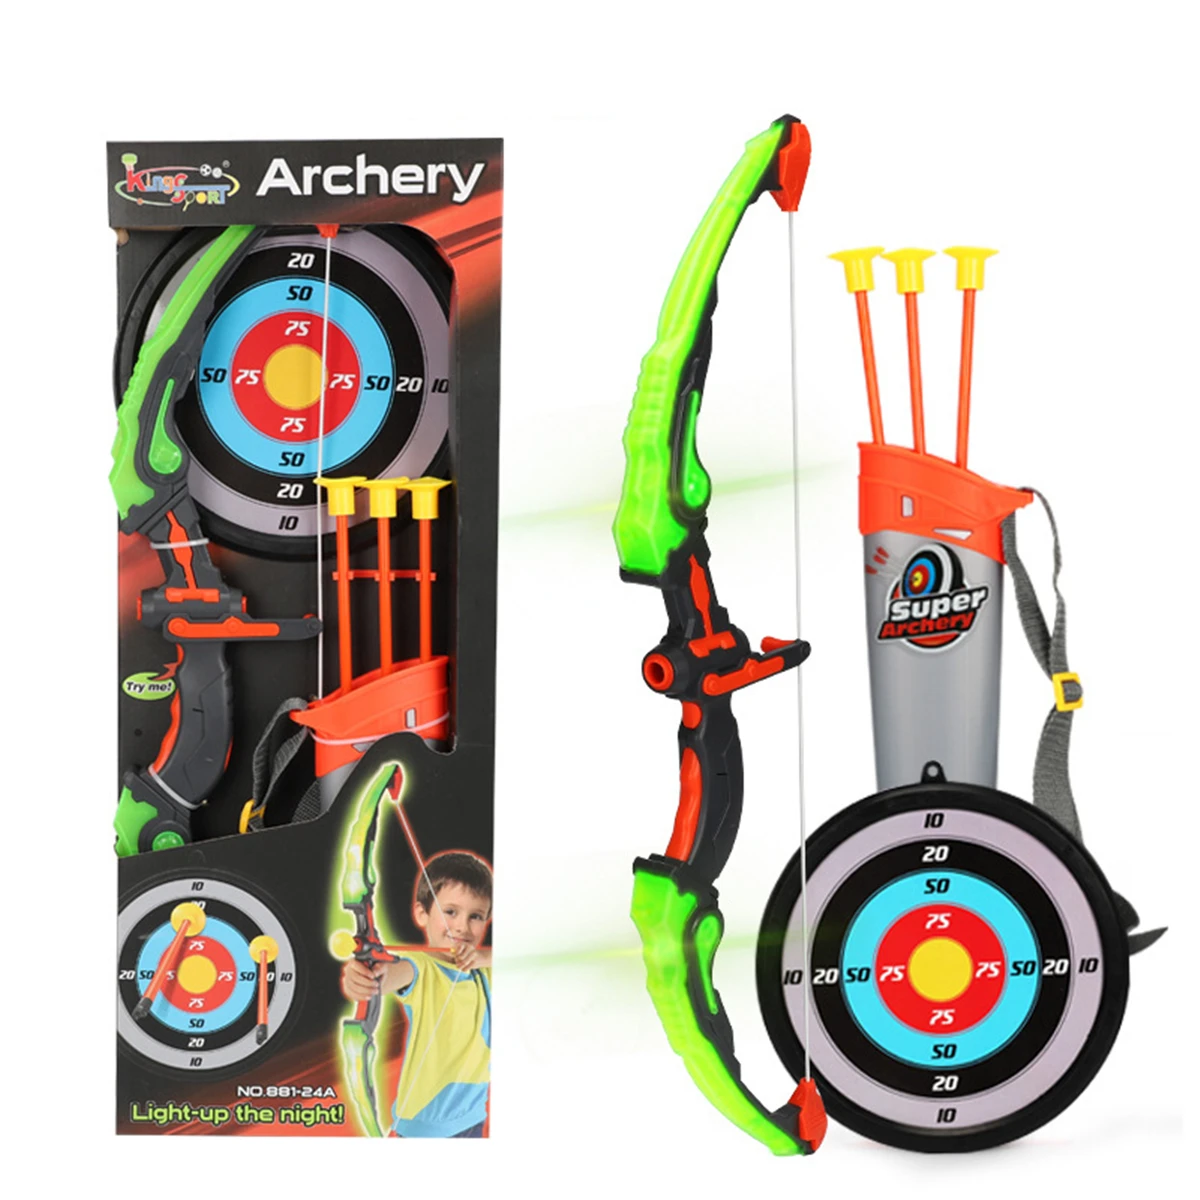 Light Up Archery Set Perfect For Night Time Ideal Xmas Gift For Kids 